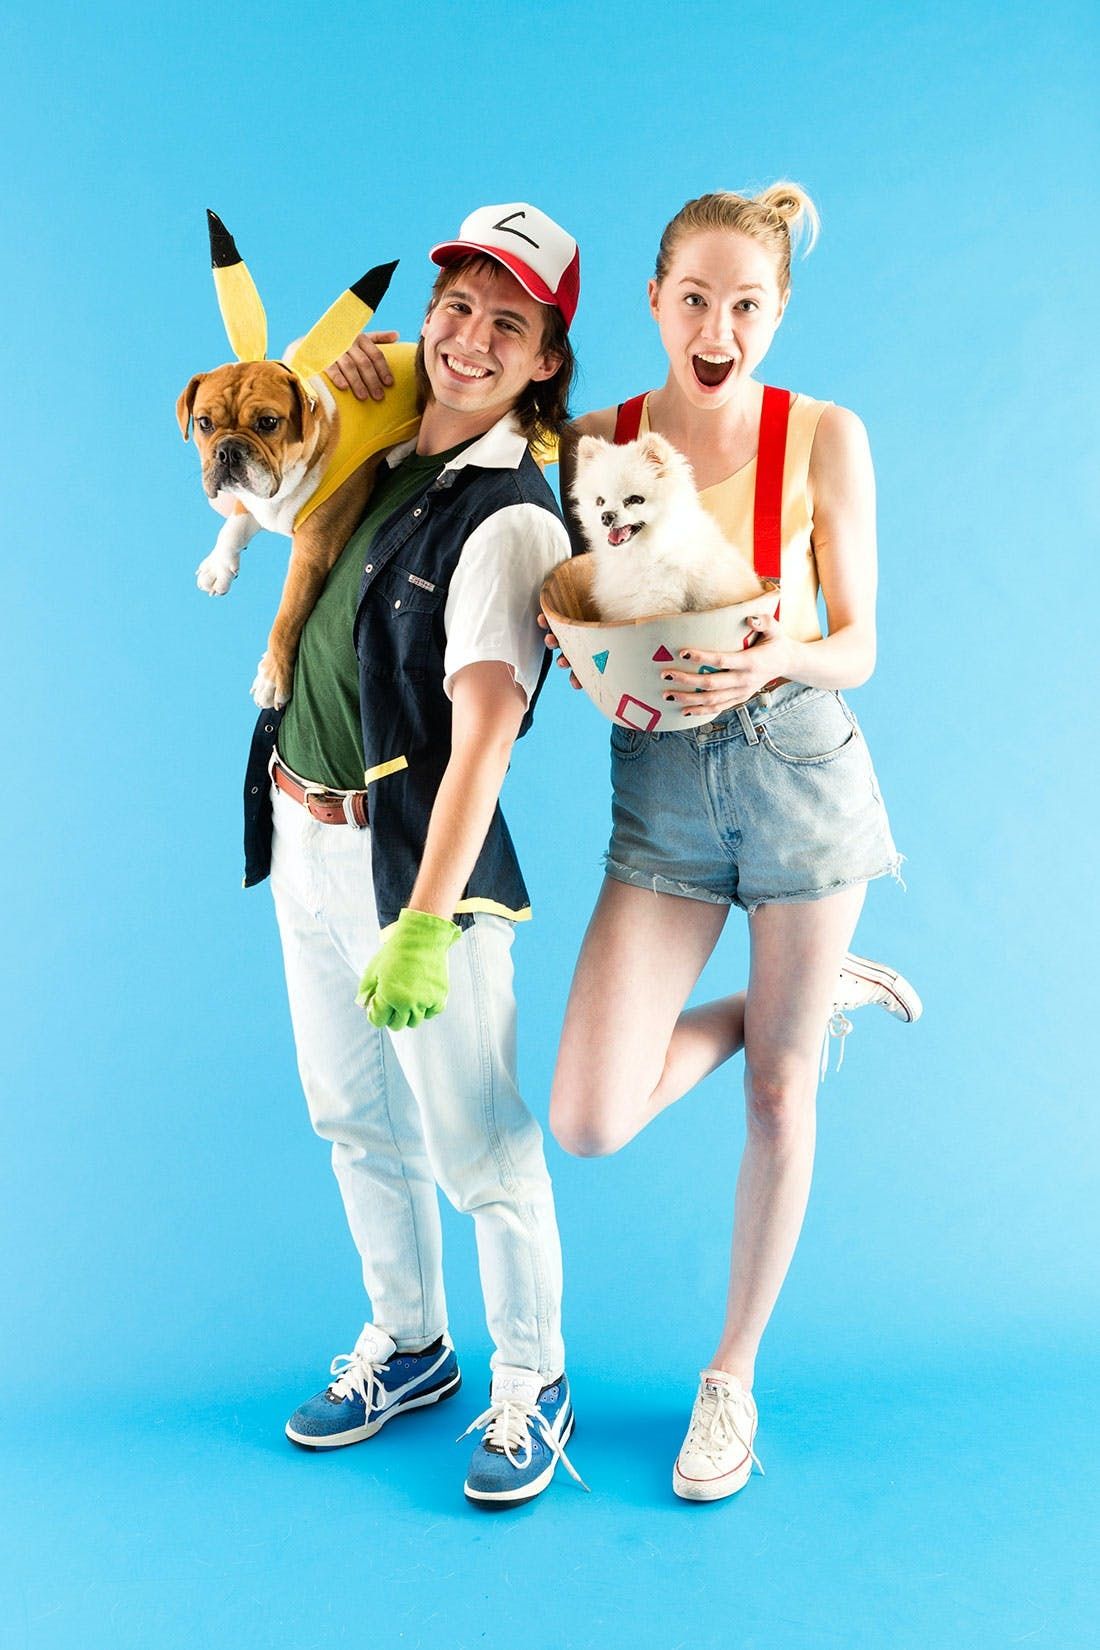 This Group Pokémon Costume Involves Your Friends and Pets - Brit + Co